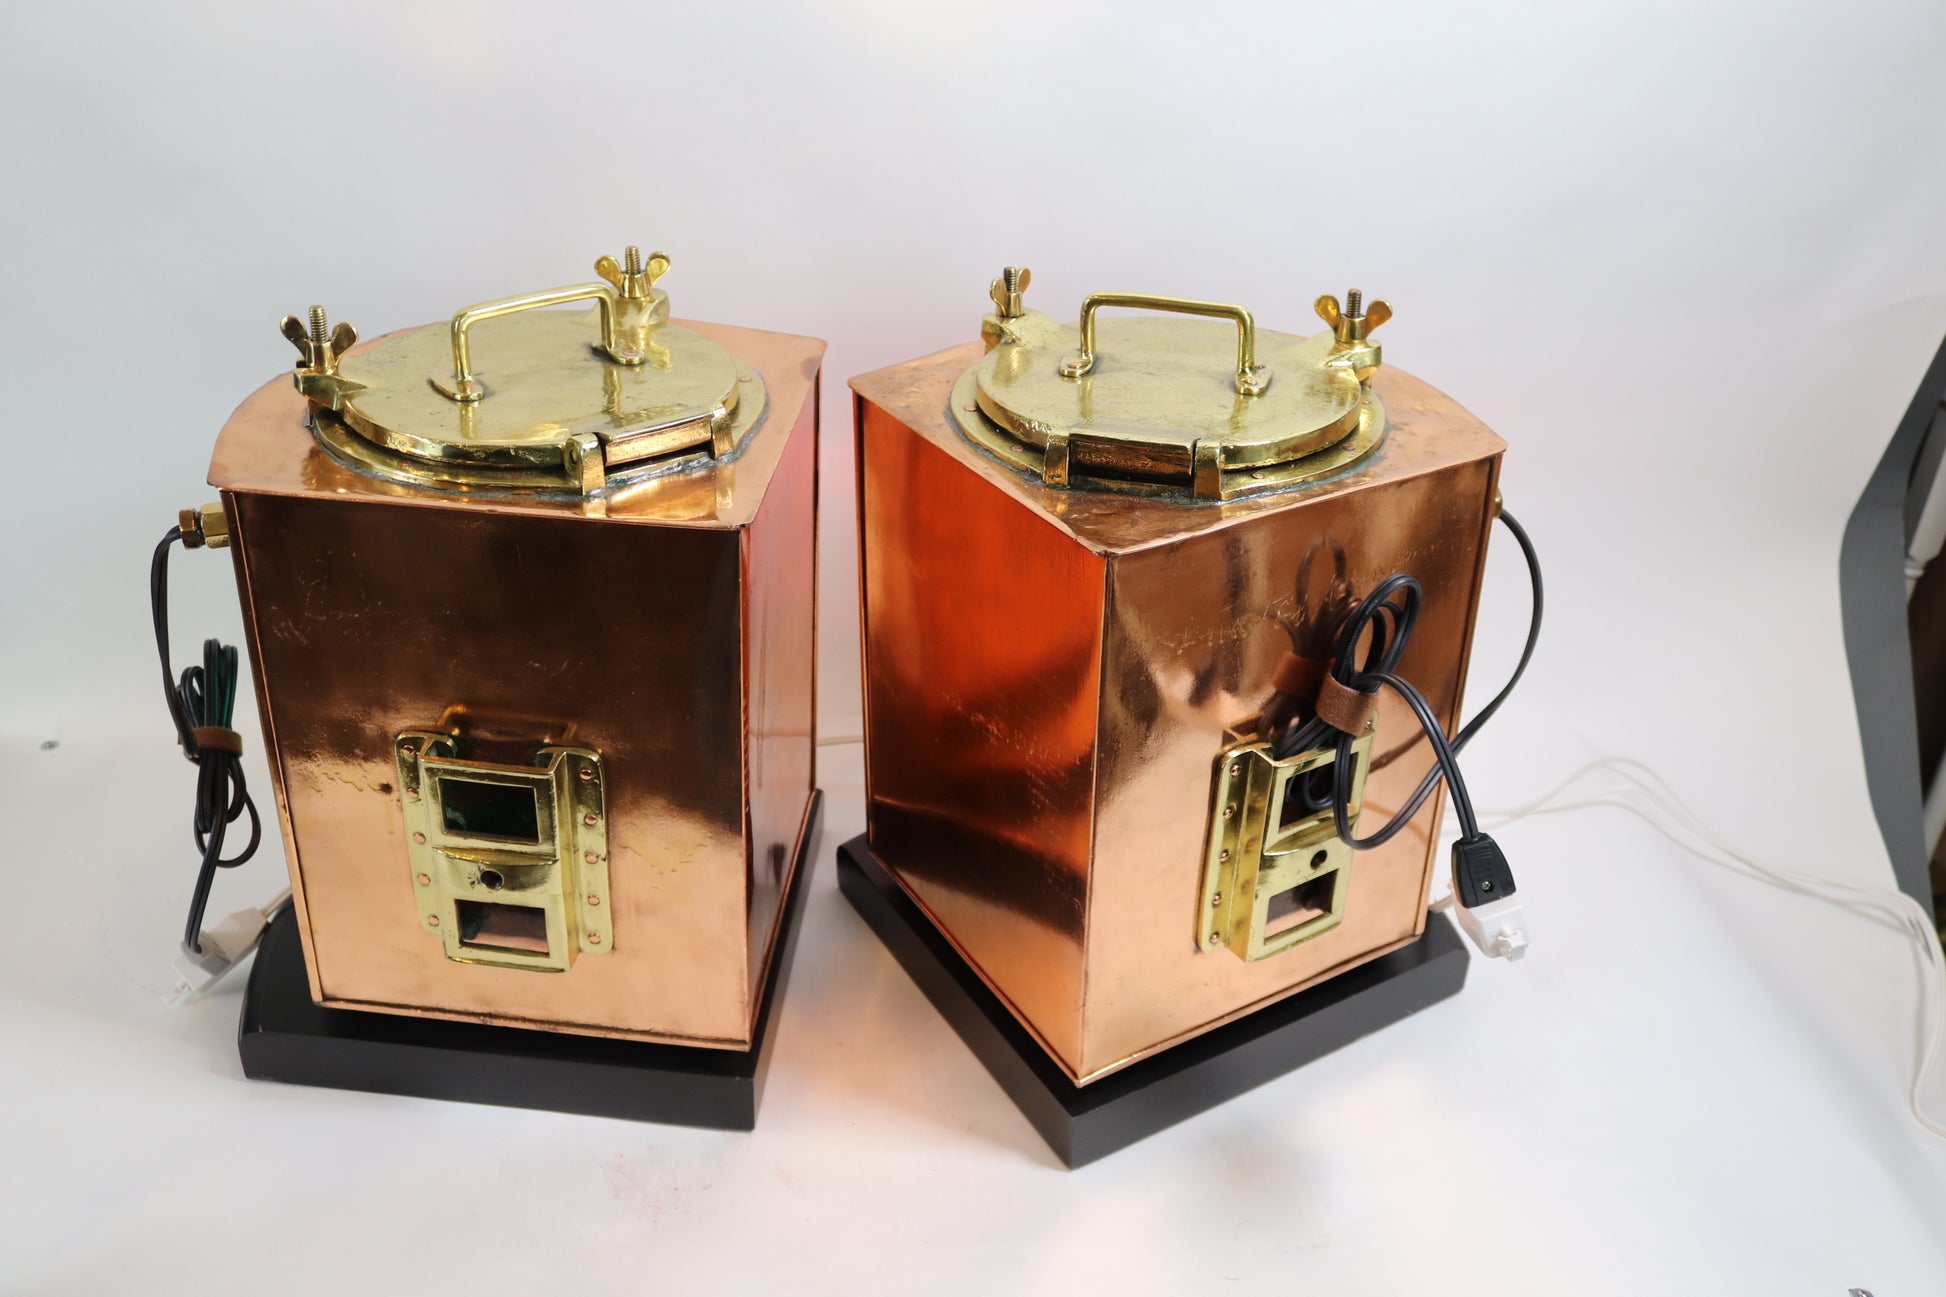 Copper Shops Port and Starboard Lanterns - Lannan Gallery